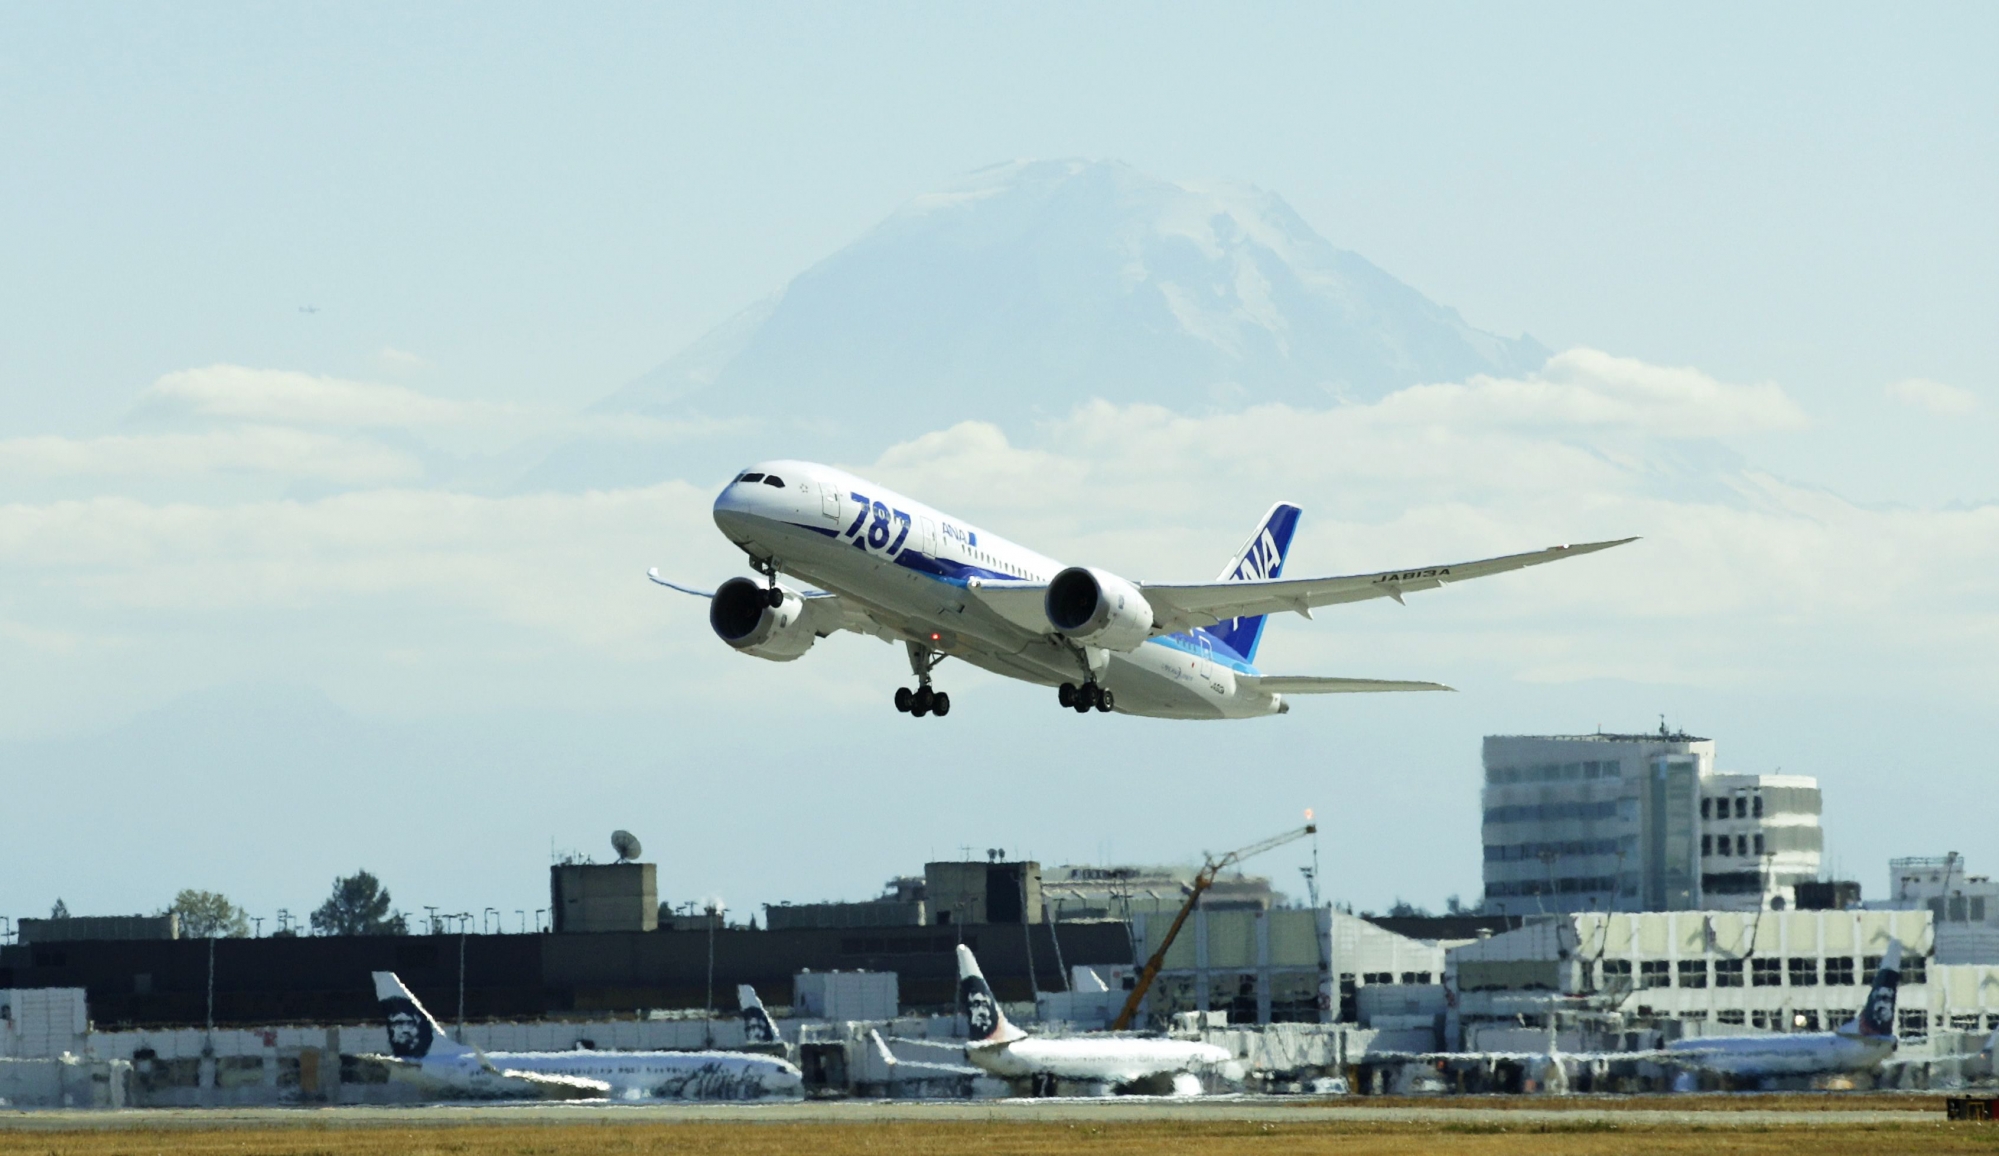 With Mount Rainier in the background, the first scheduled Boeing 787 airplane to depart from Seattle-Tacoma International Airport takes off  Tuesday, Oct. 2, 2012 in Seattle. The plane, operated by All Nippon Airways, will serve ANA's Seattle-Tokyo route. (AP Photo/Ted S. Warren) Seattle Tokyo Dreamliner